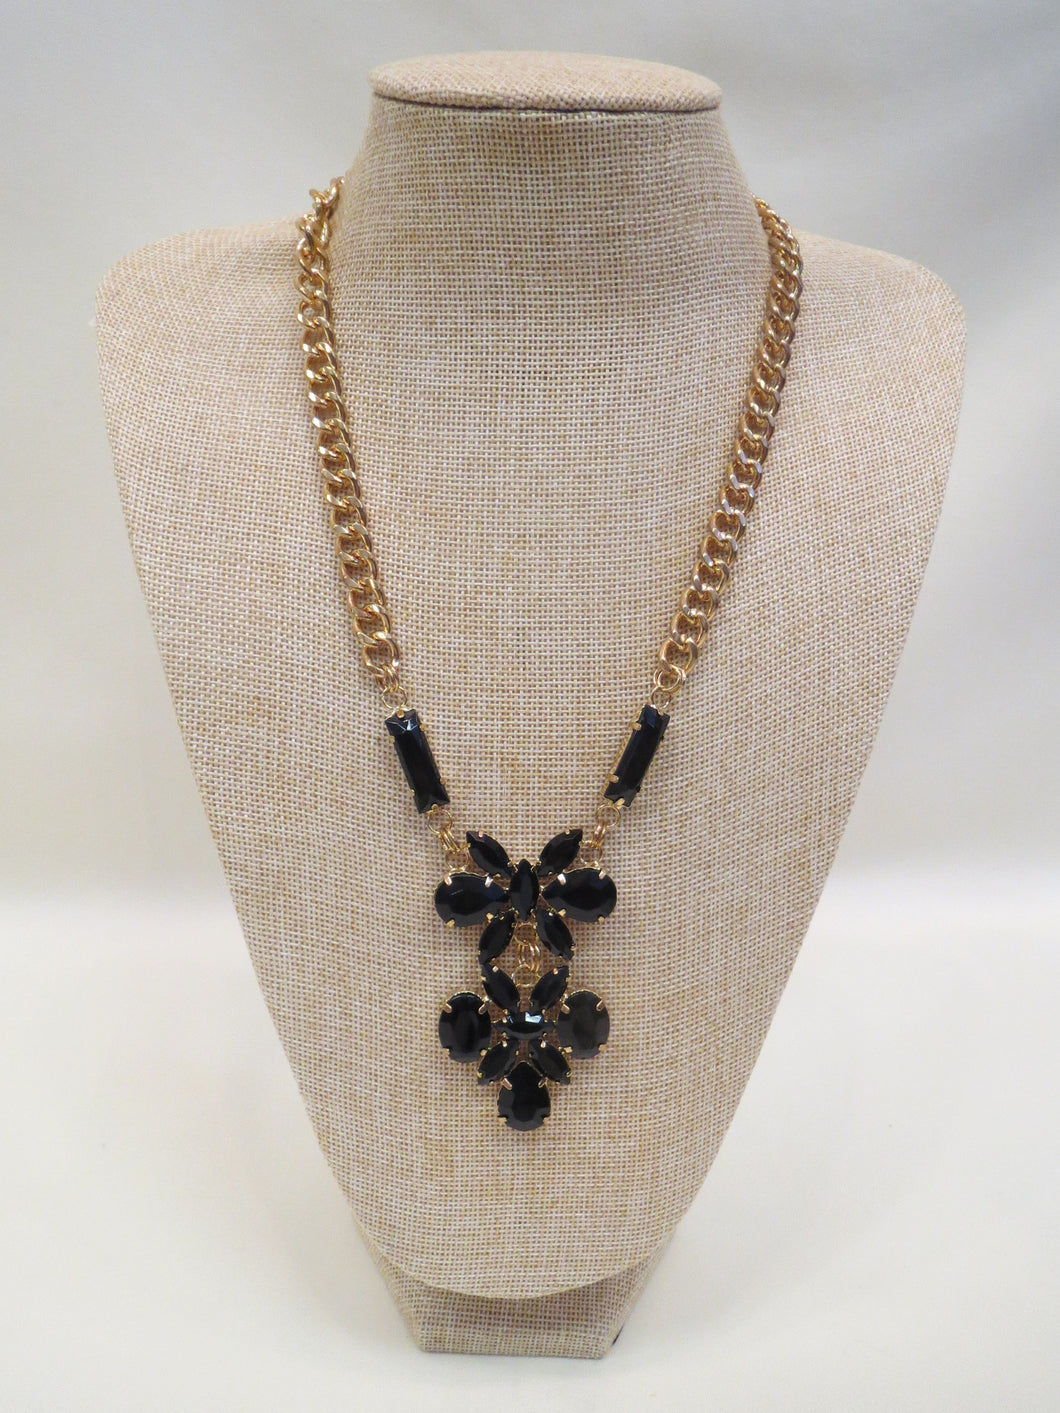 ADO | Gold Chain Necklace with Black Stone Design - All Decd Out